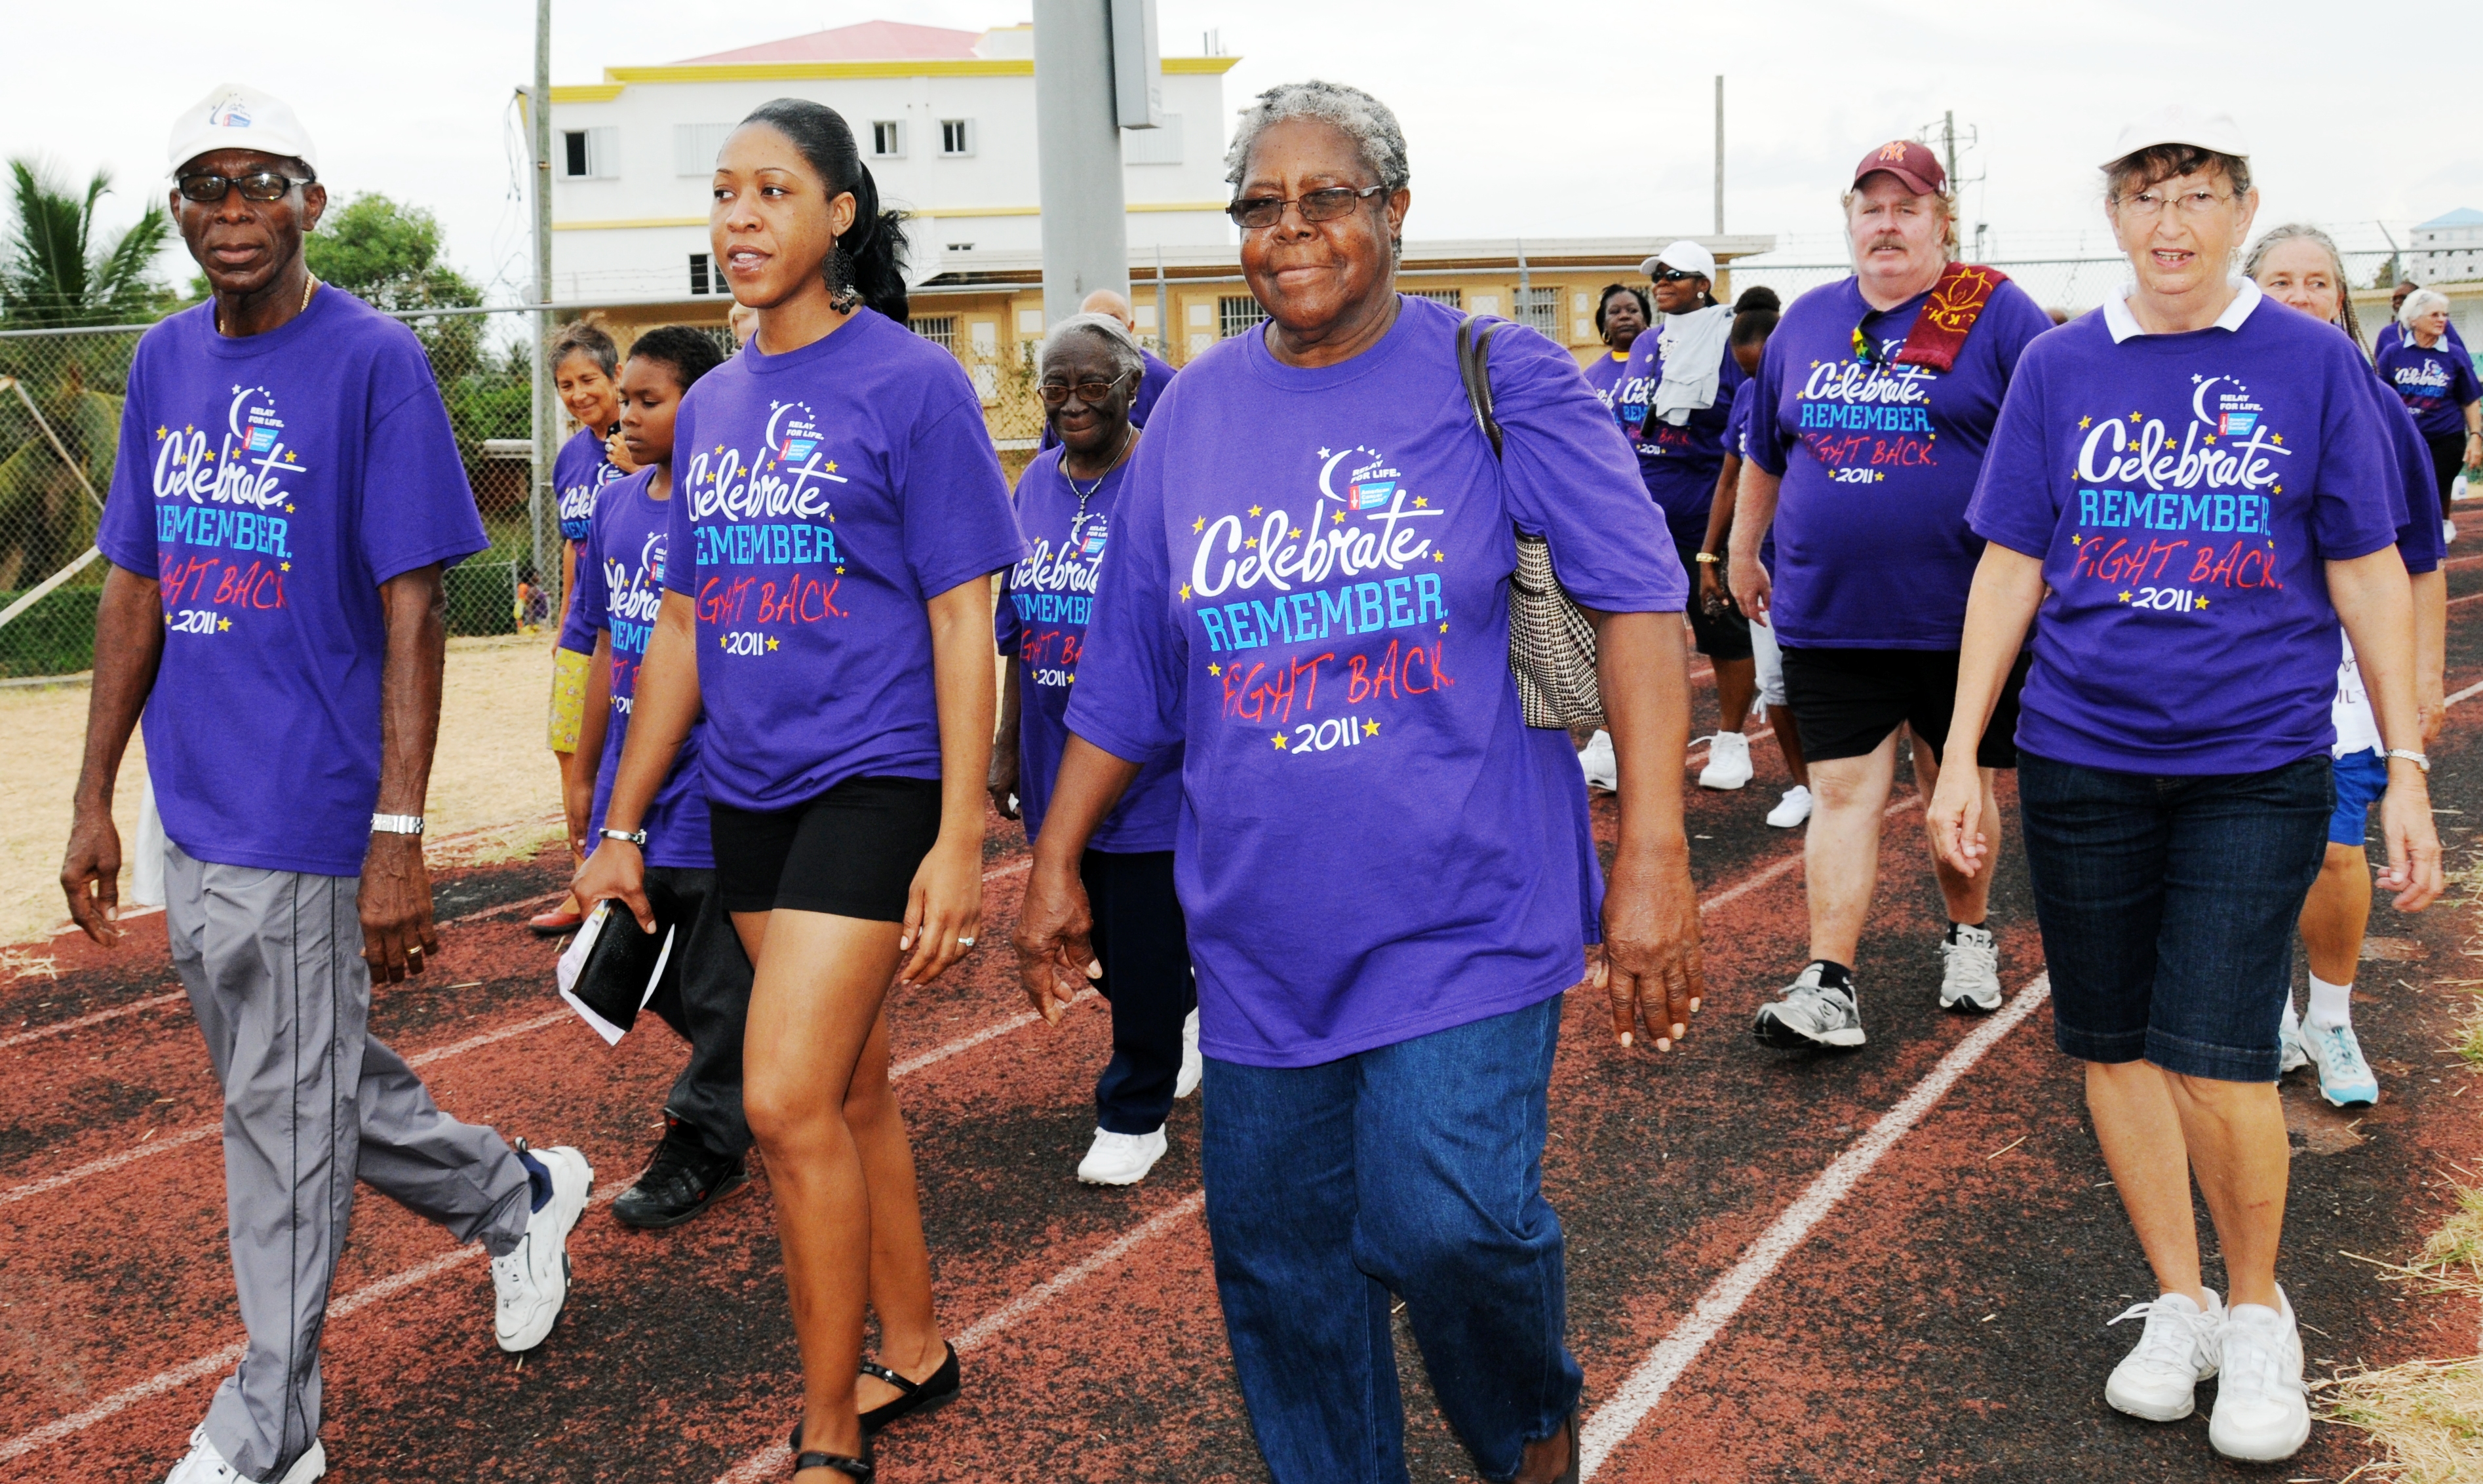 Participants in the 2011 Relay for Life at the CAHS track.